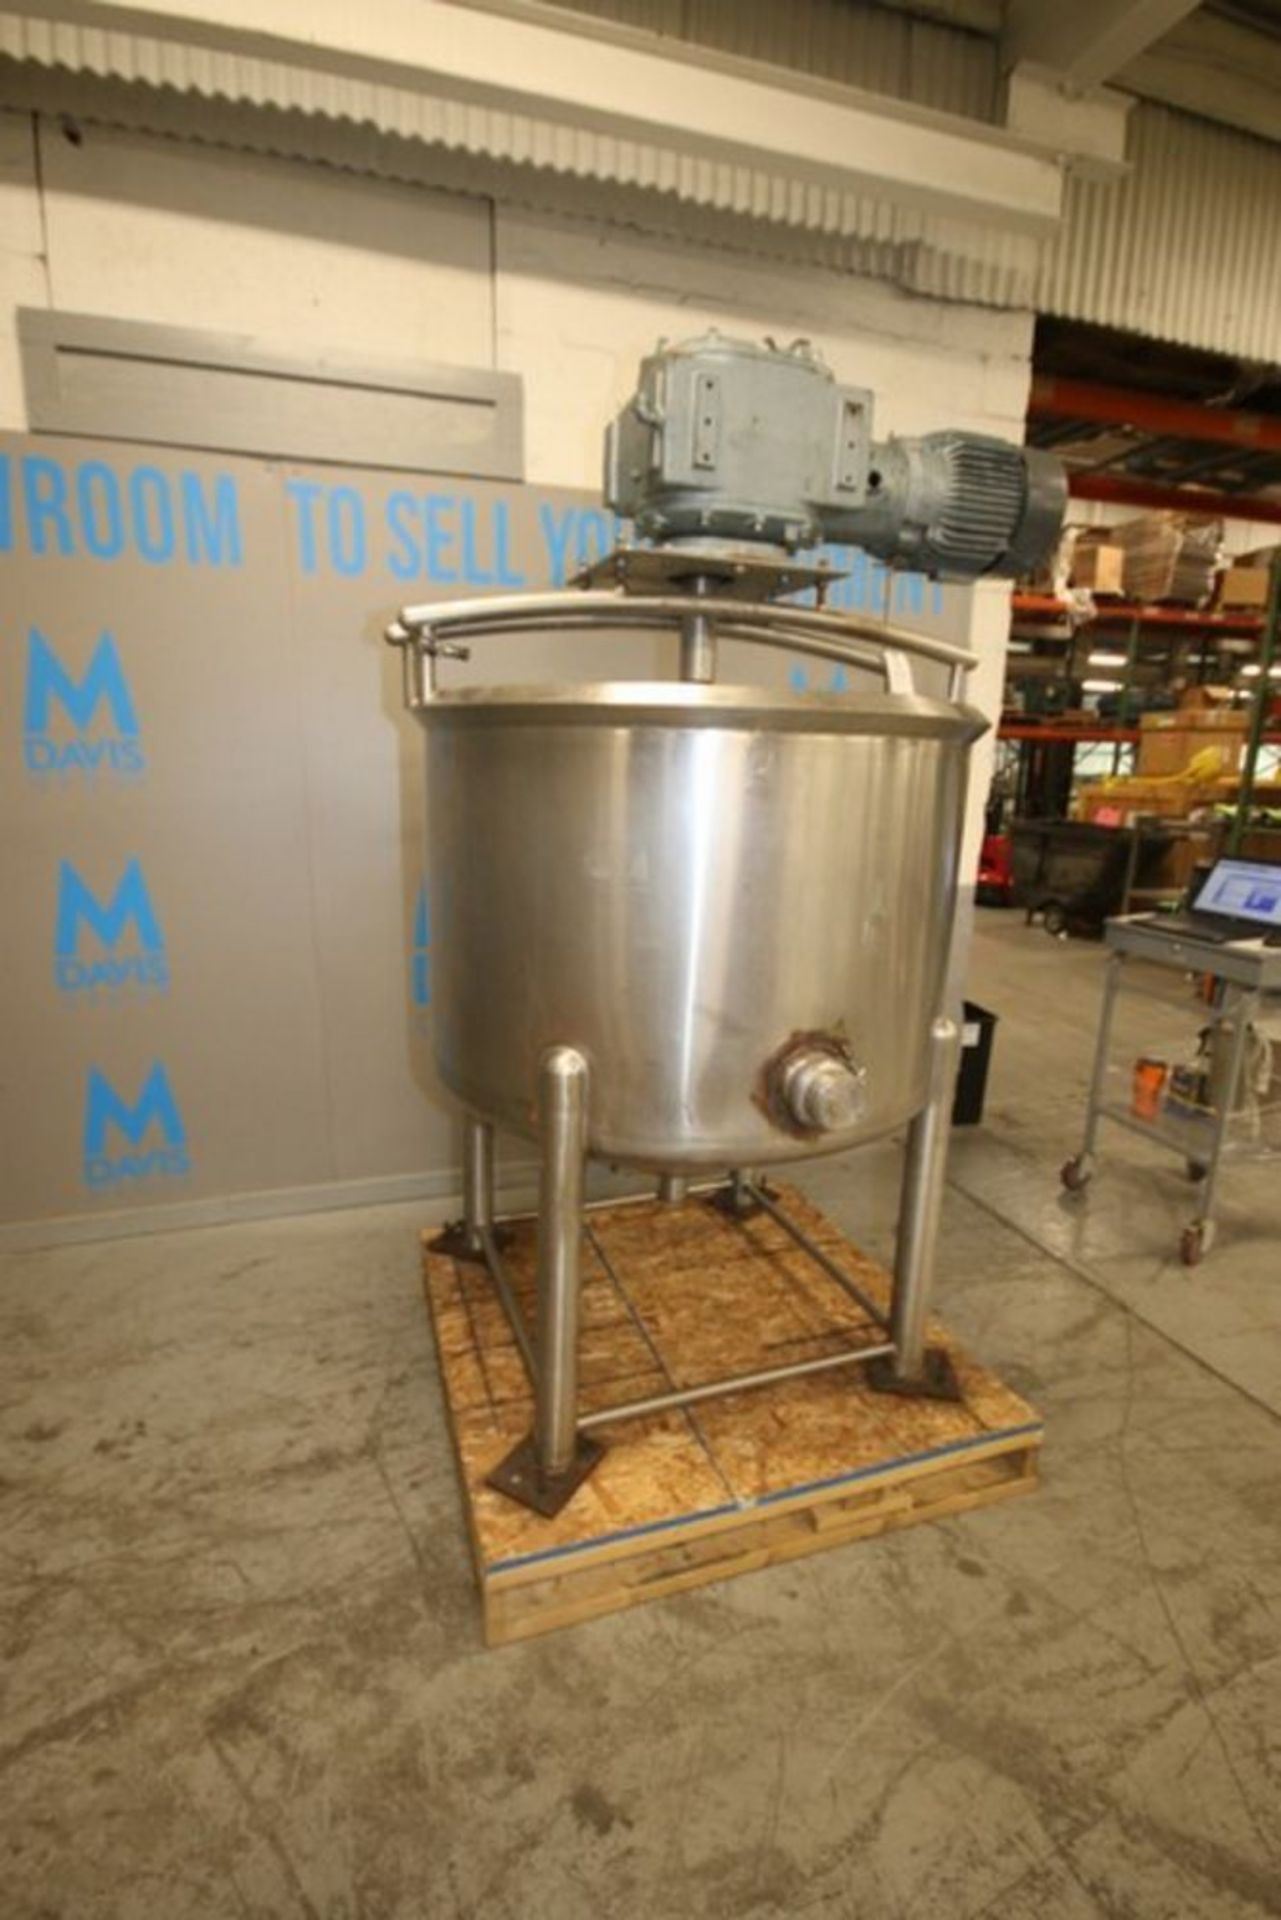 Cherry-Burrell 300 Gal. S/S Single Wall Tank, S/N F-163-89, with Cone Bottom, with S/S Agitation - Image 2 of 8